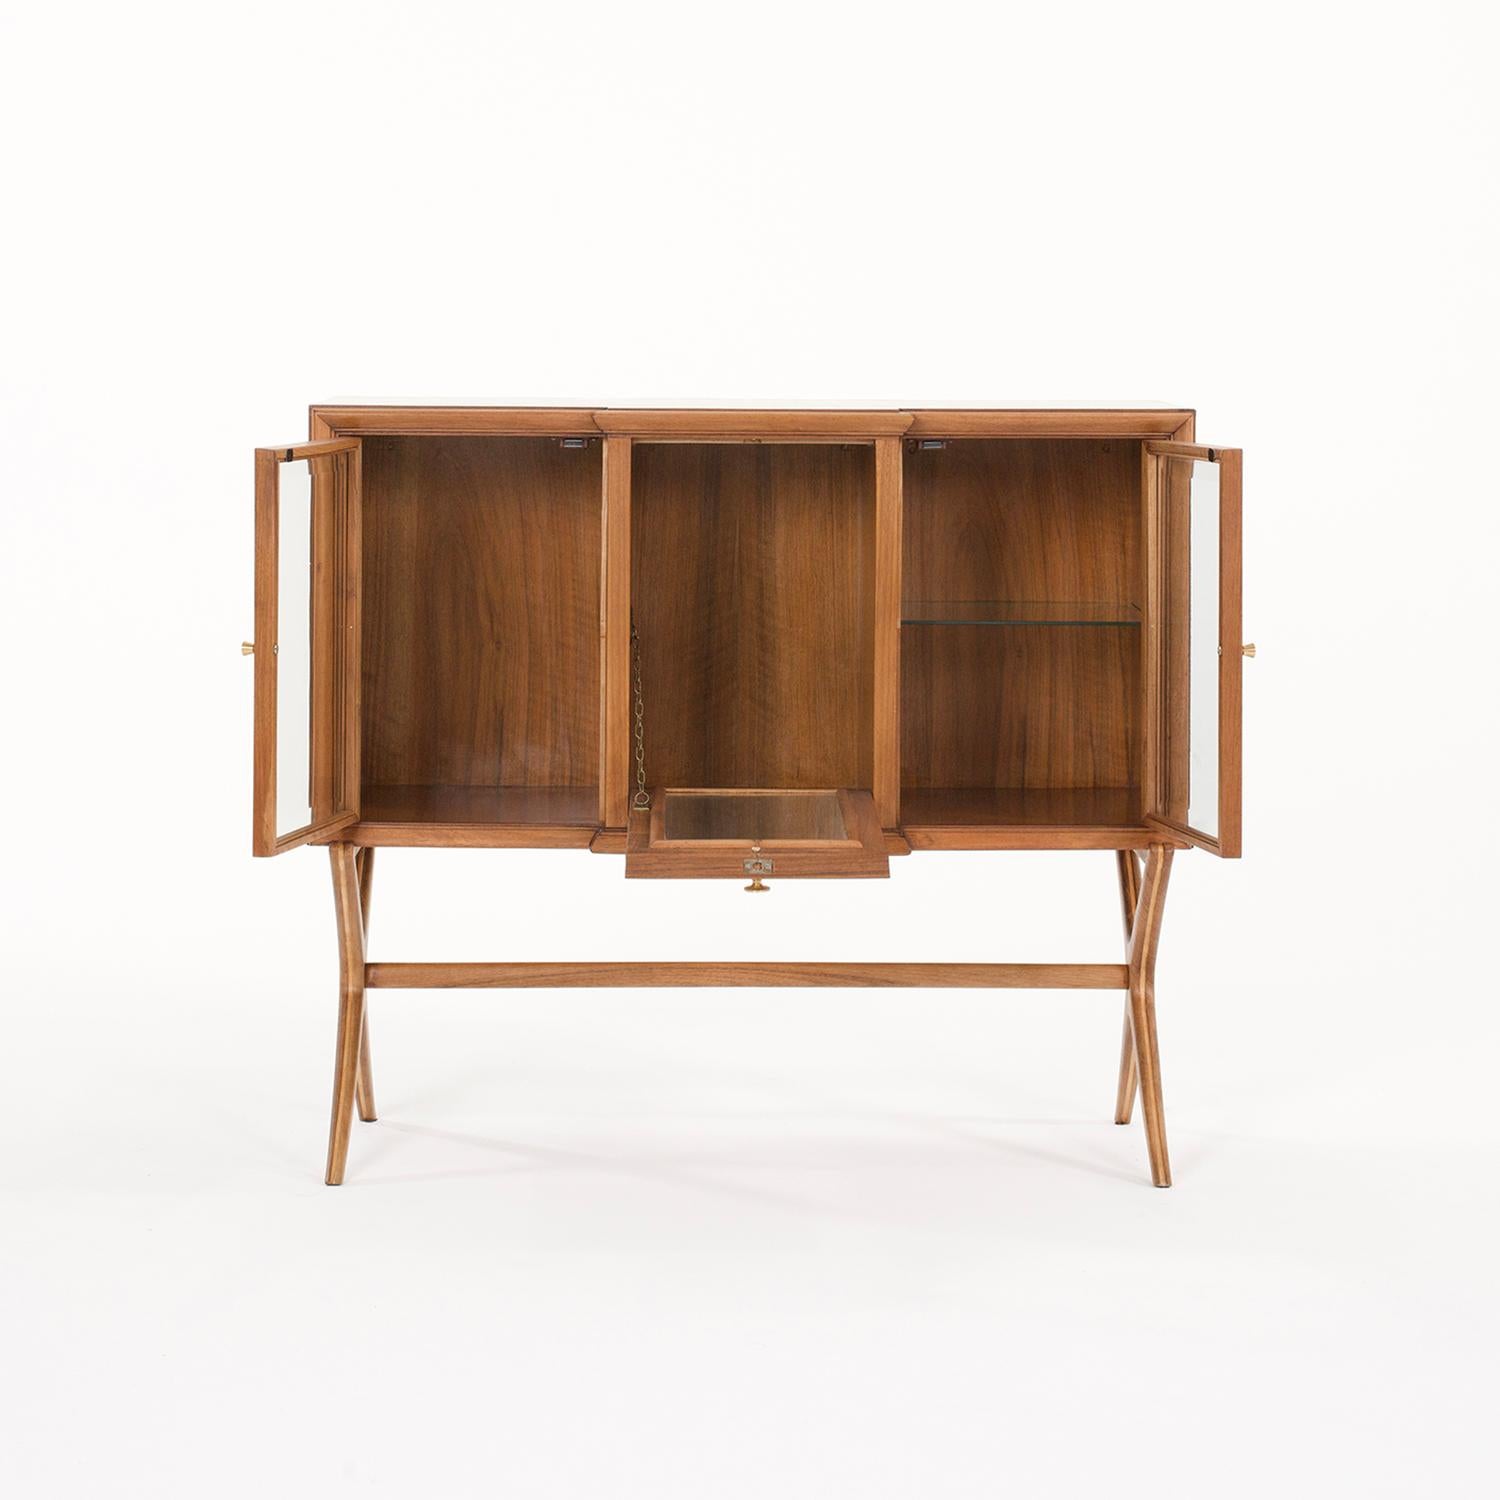 A small, vintage Mid-Century modern Italian cocktail dry bar made of hand crafted polished Walnut, in good condition. The vitrine cabinet is composed in the middle with one foldable door which is halted, enhanced by a brass chain. The sideboard is